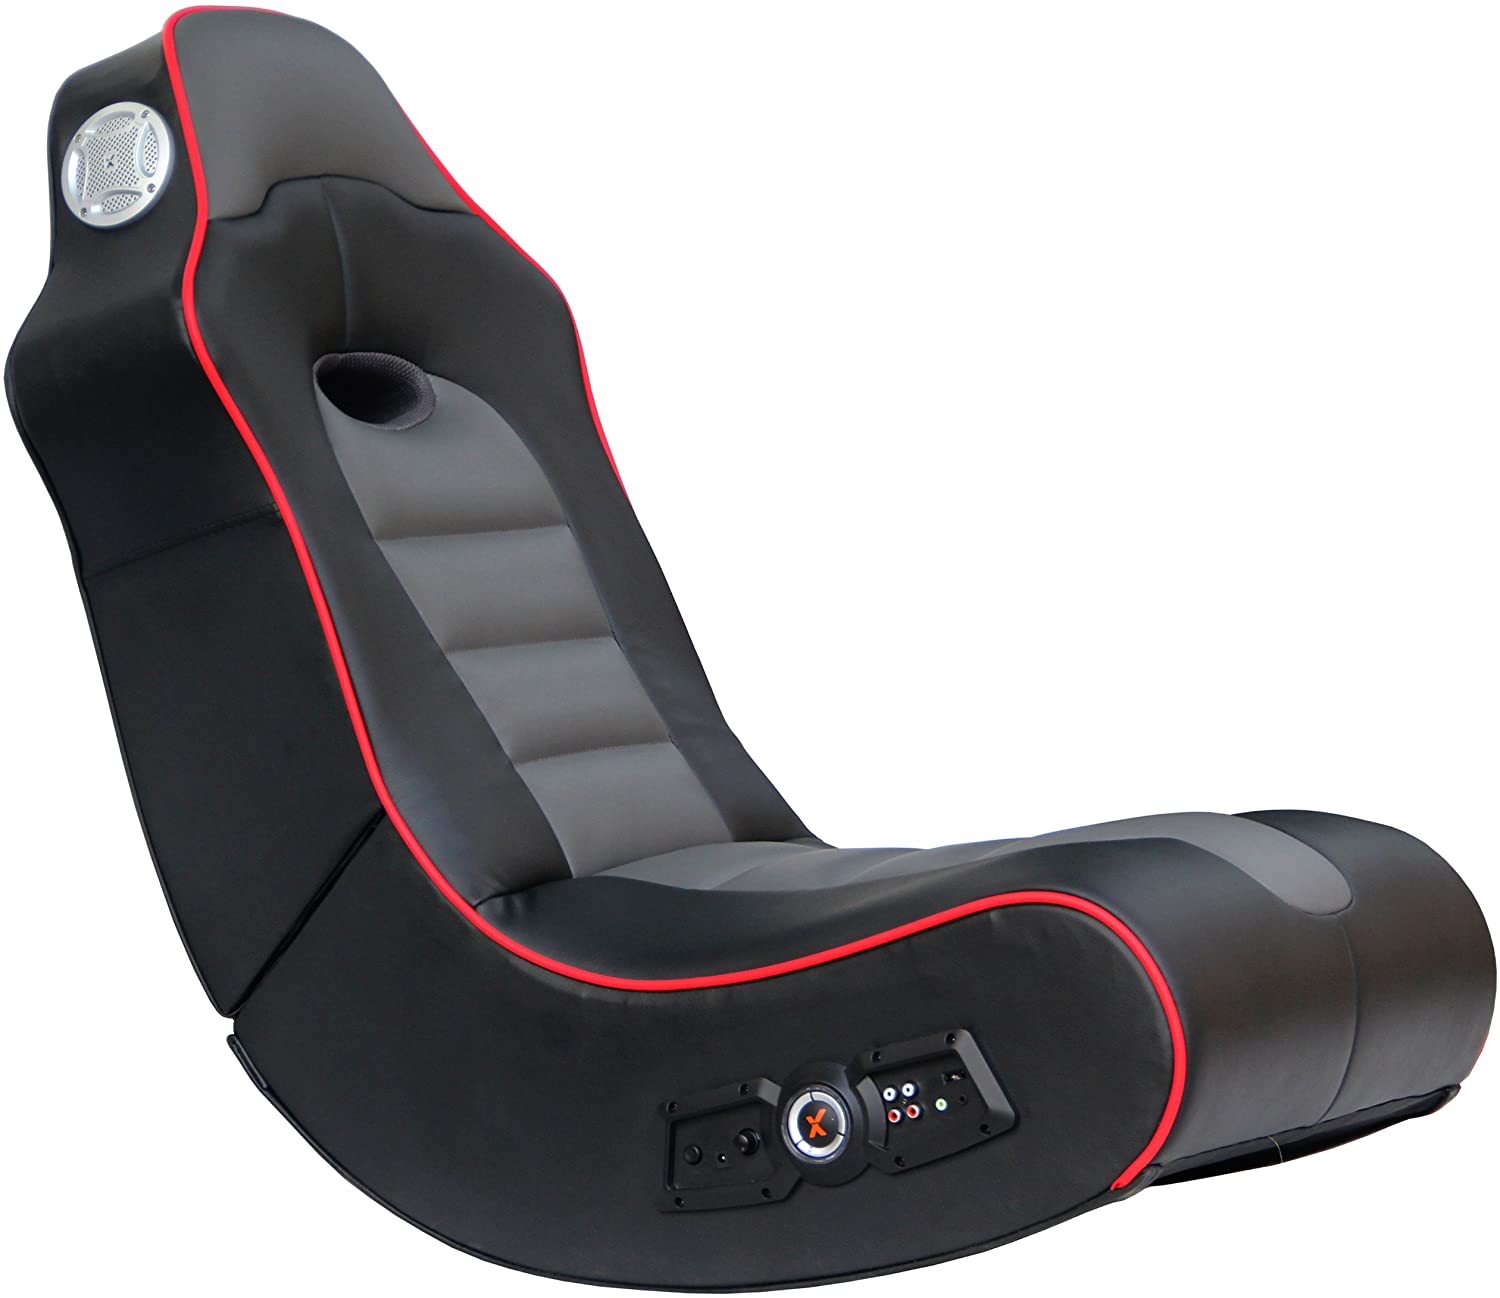 Full Featured Gaming Chair